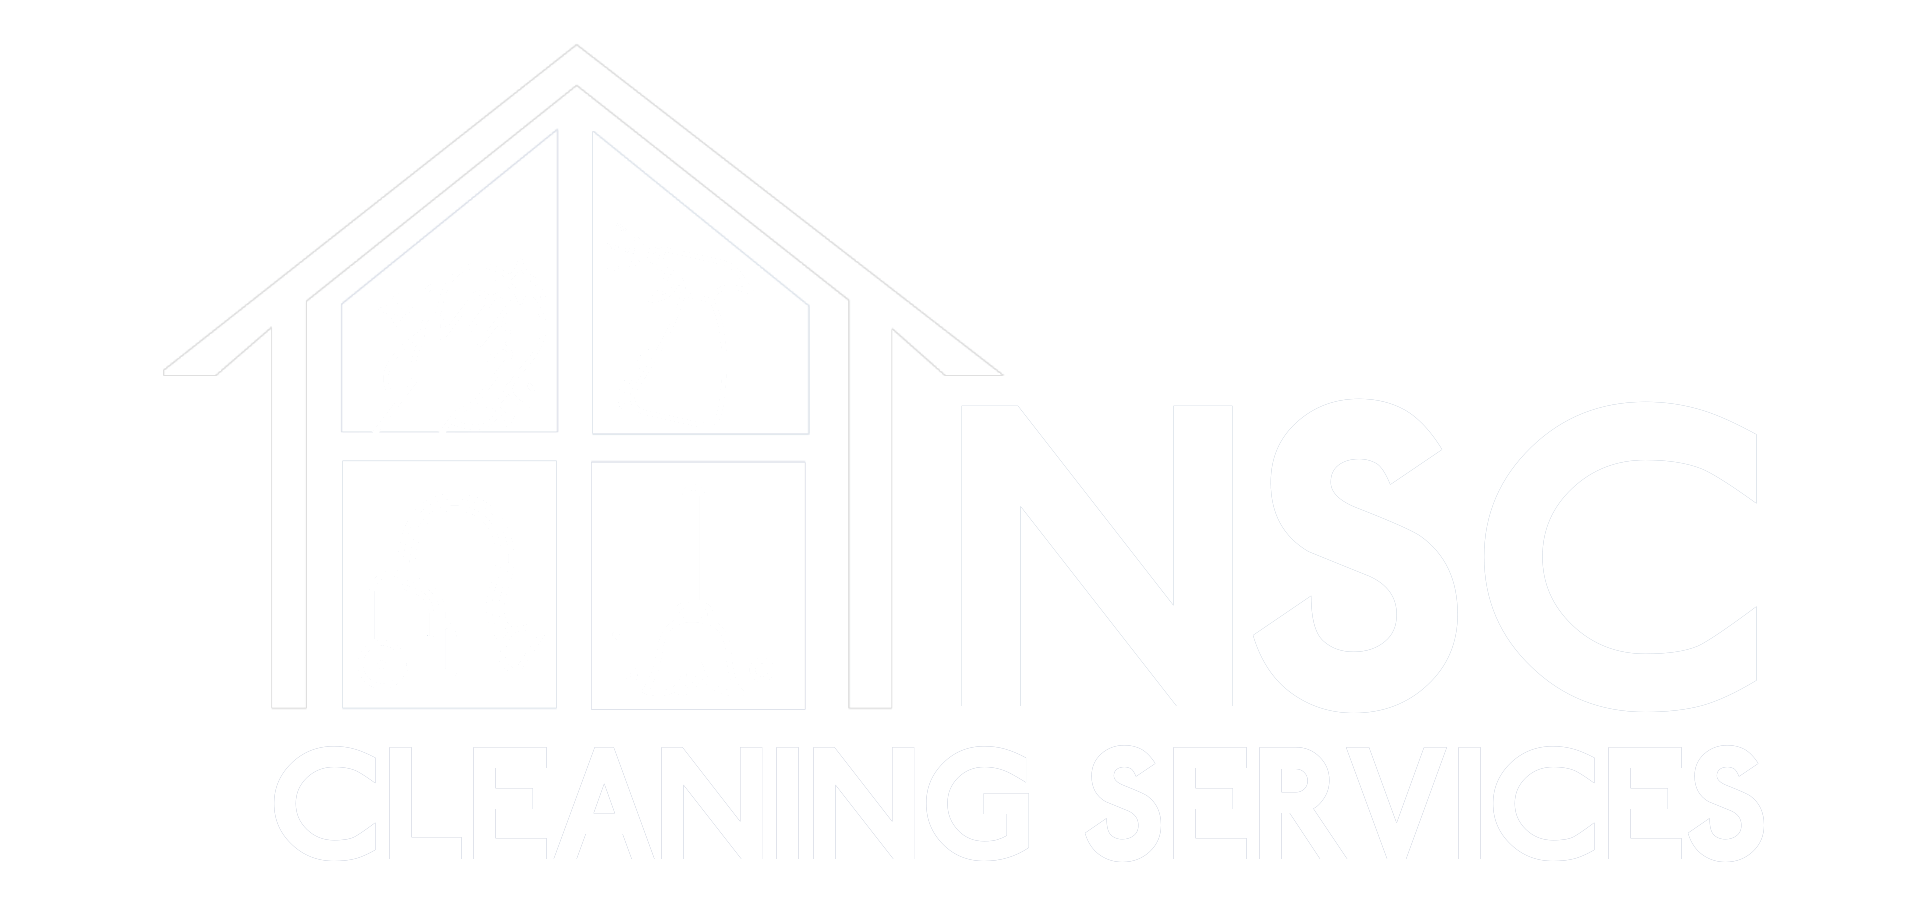 NSC CLEANING SERVICES WHITE